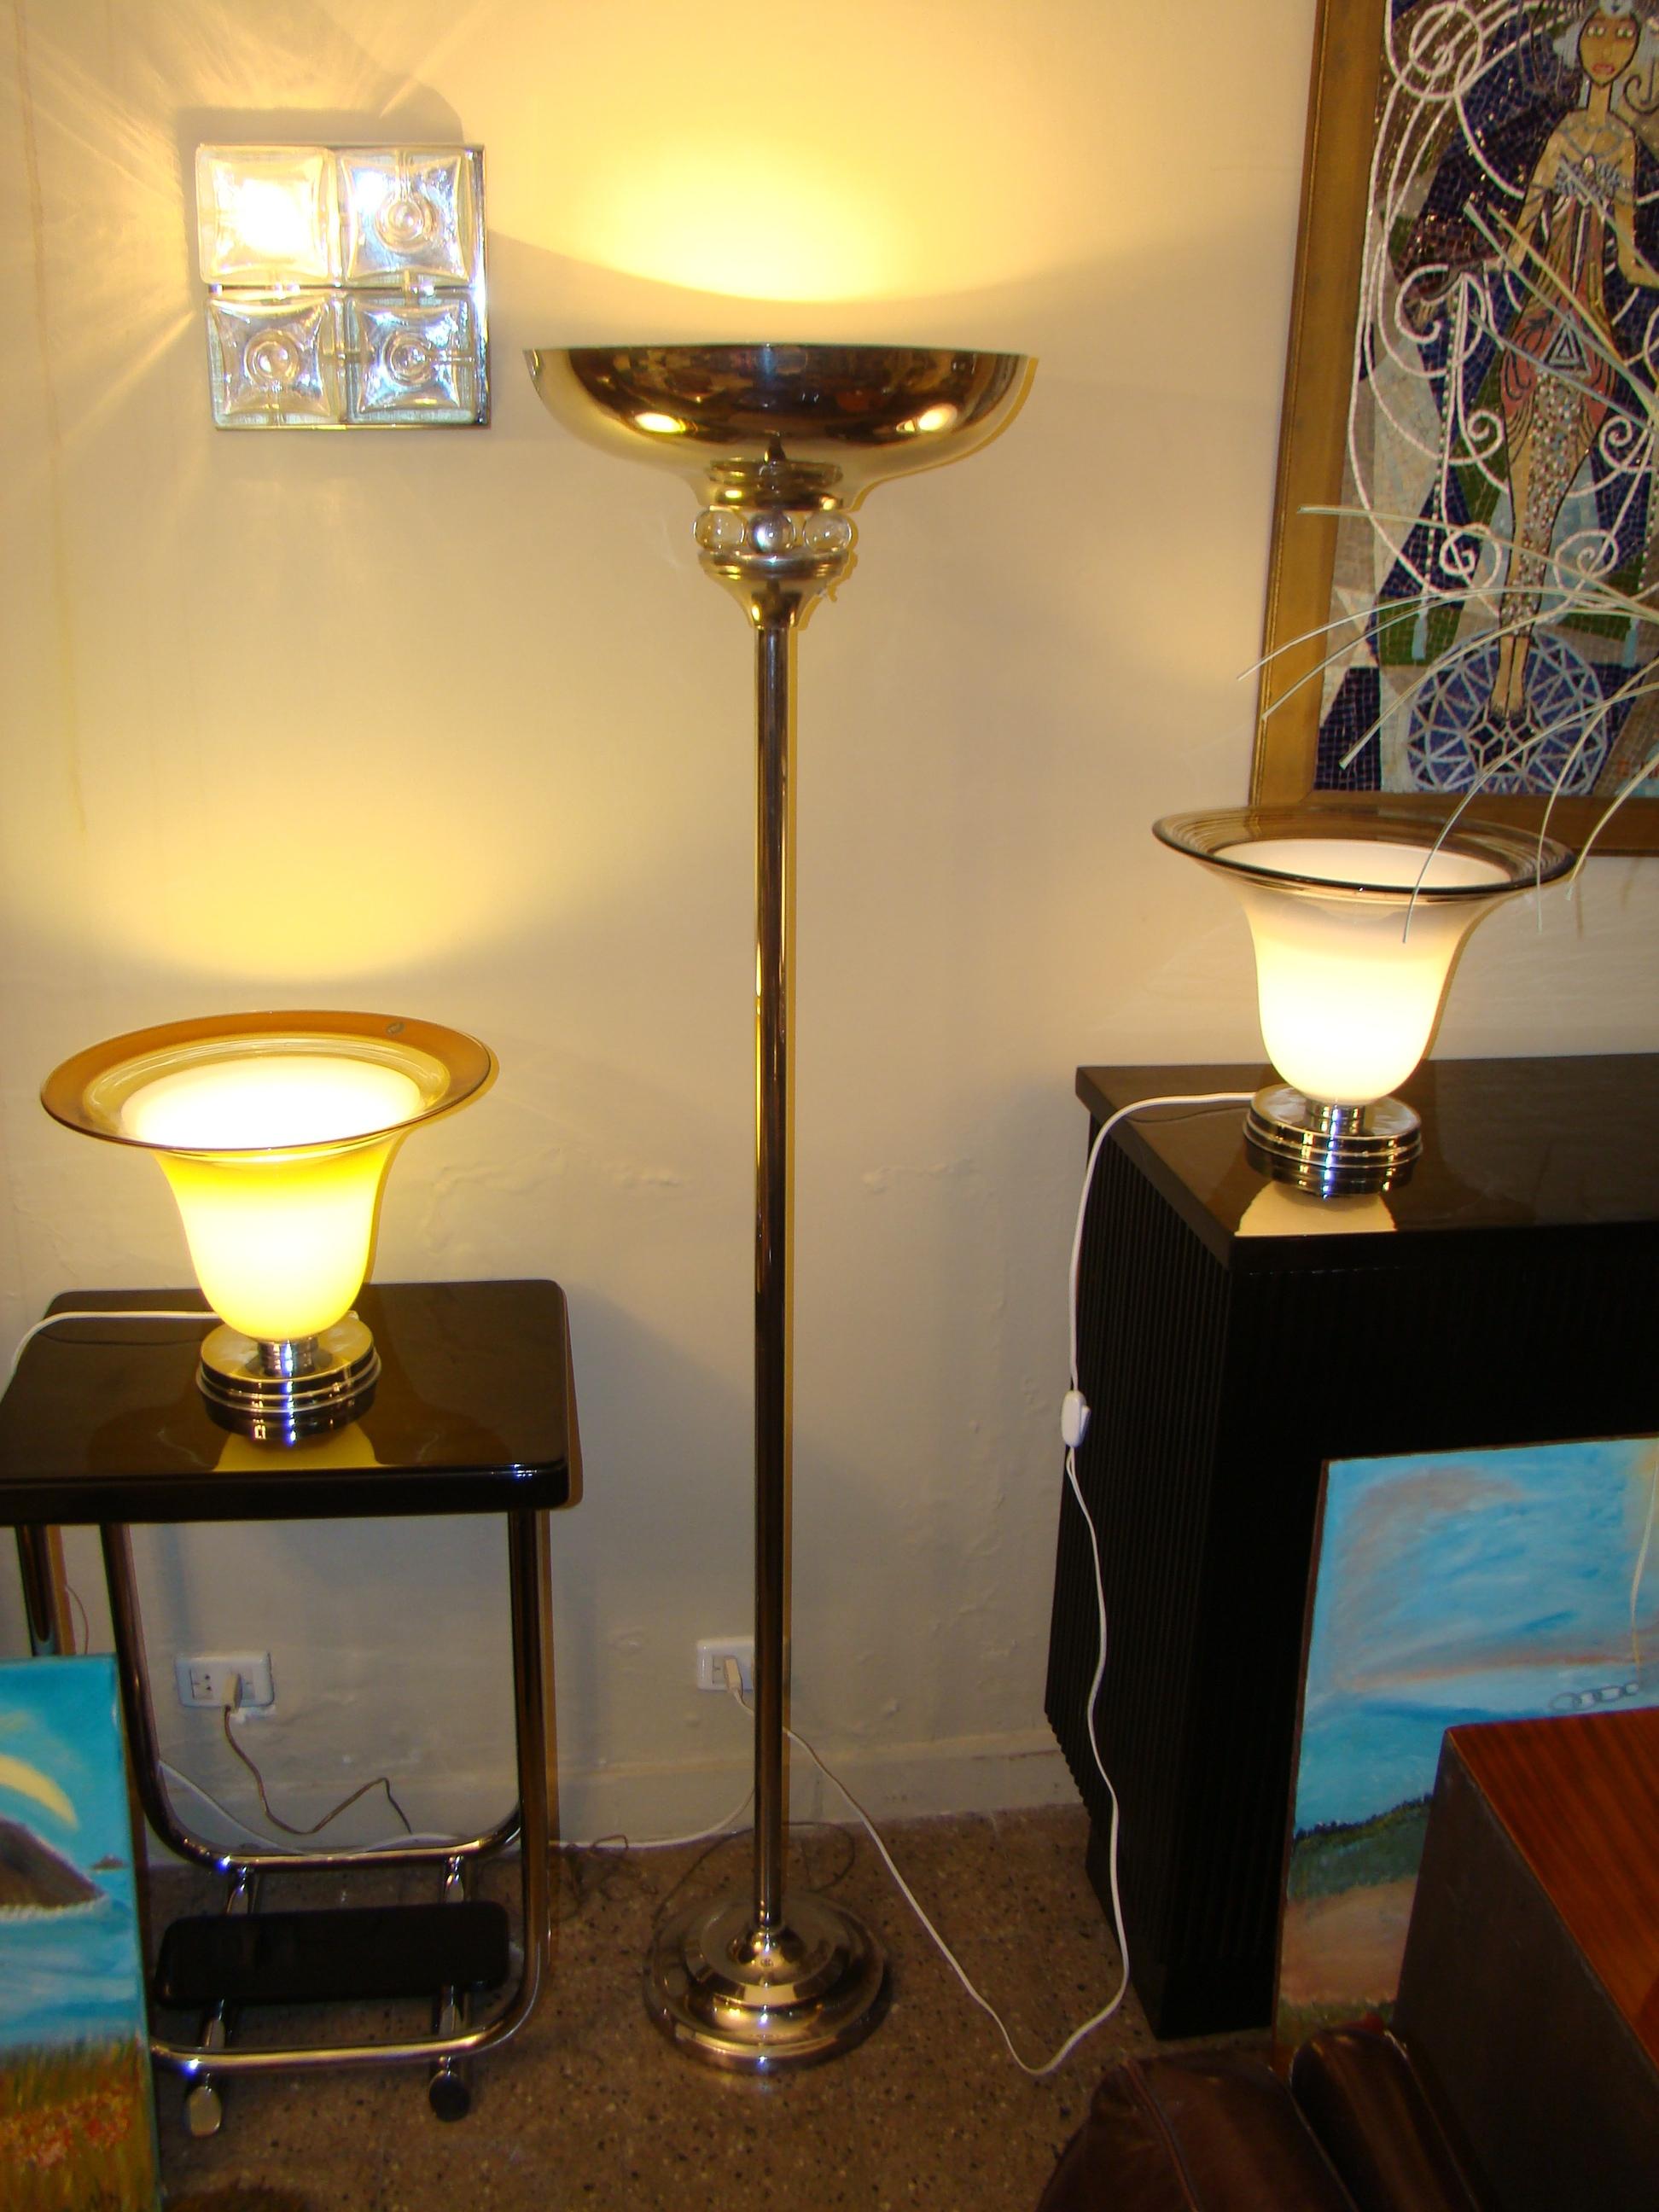 Floor lamp Art Deco

Material: chrome and glass
German
1920
You want to live in the golden years, those are the floor lamps that your project needs.
We have specialized in of Art Deco and Art Nouveau styles since 1982.
Pushing the button that reads